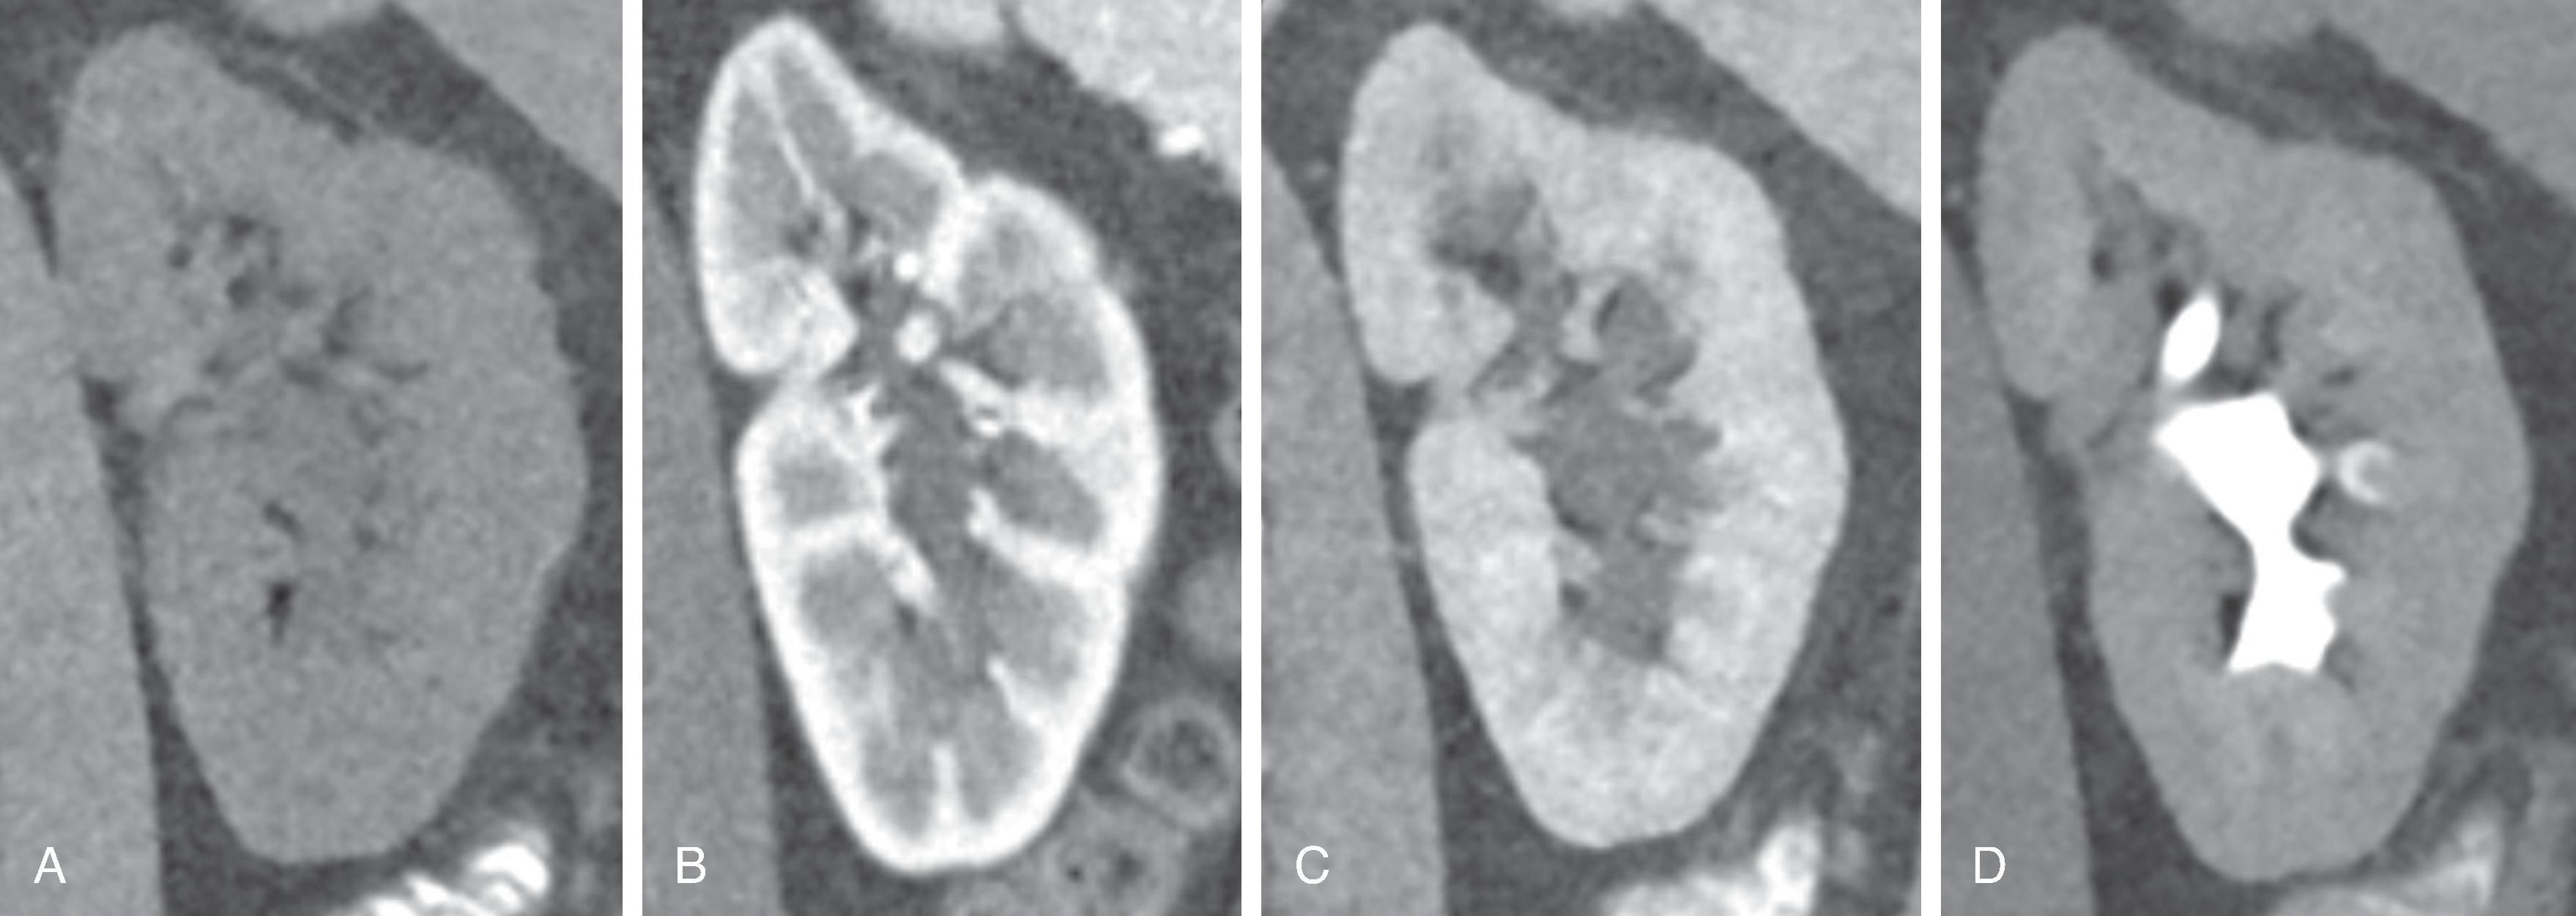 Fig. 6.4, A normal kidney imaged with CT in four different phases of contrast (A-D, left to right): noncontrast, corticomedullary phase, nephrographic phase, and excretory phase.